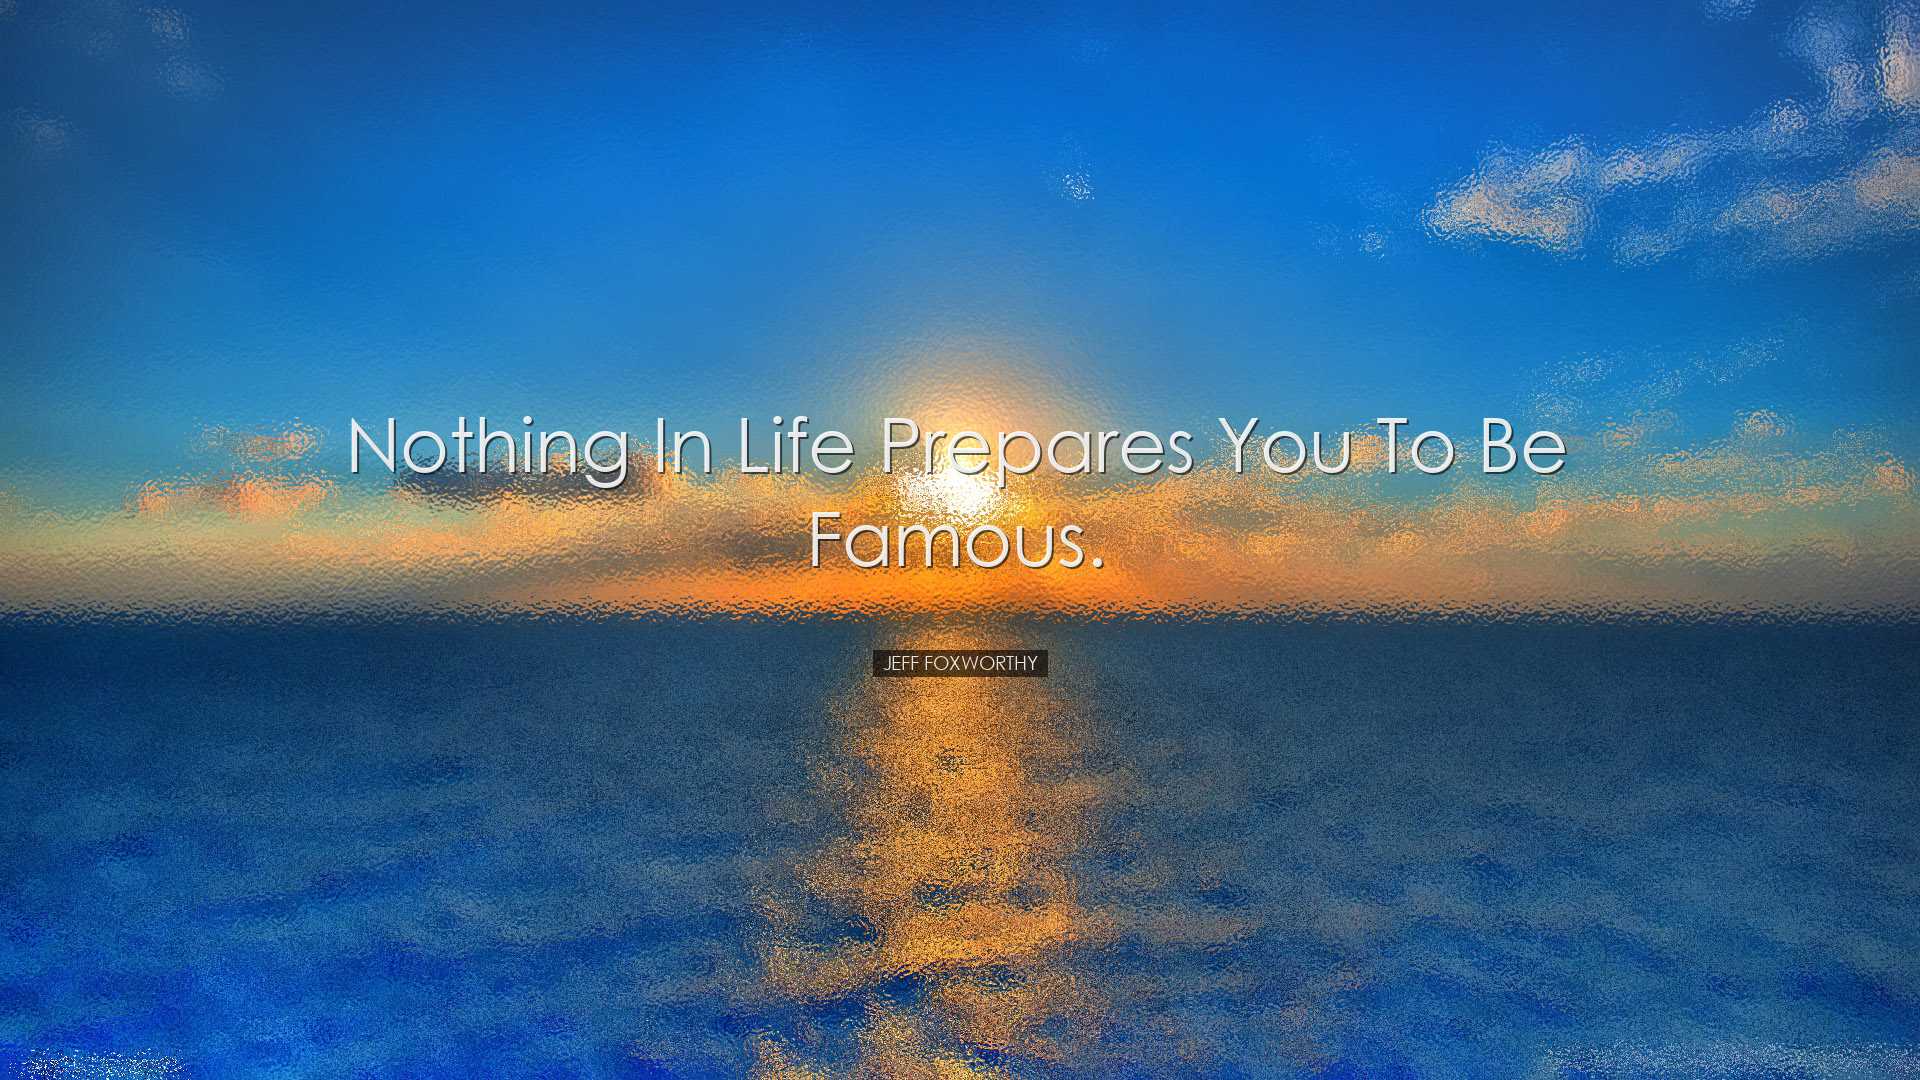 Nothing in life prepares you to be famous. - Jeff Foxworthy